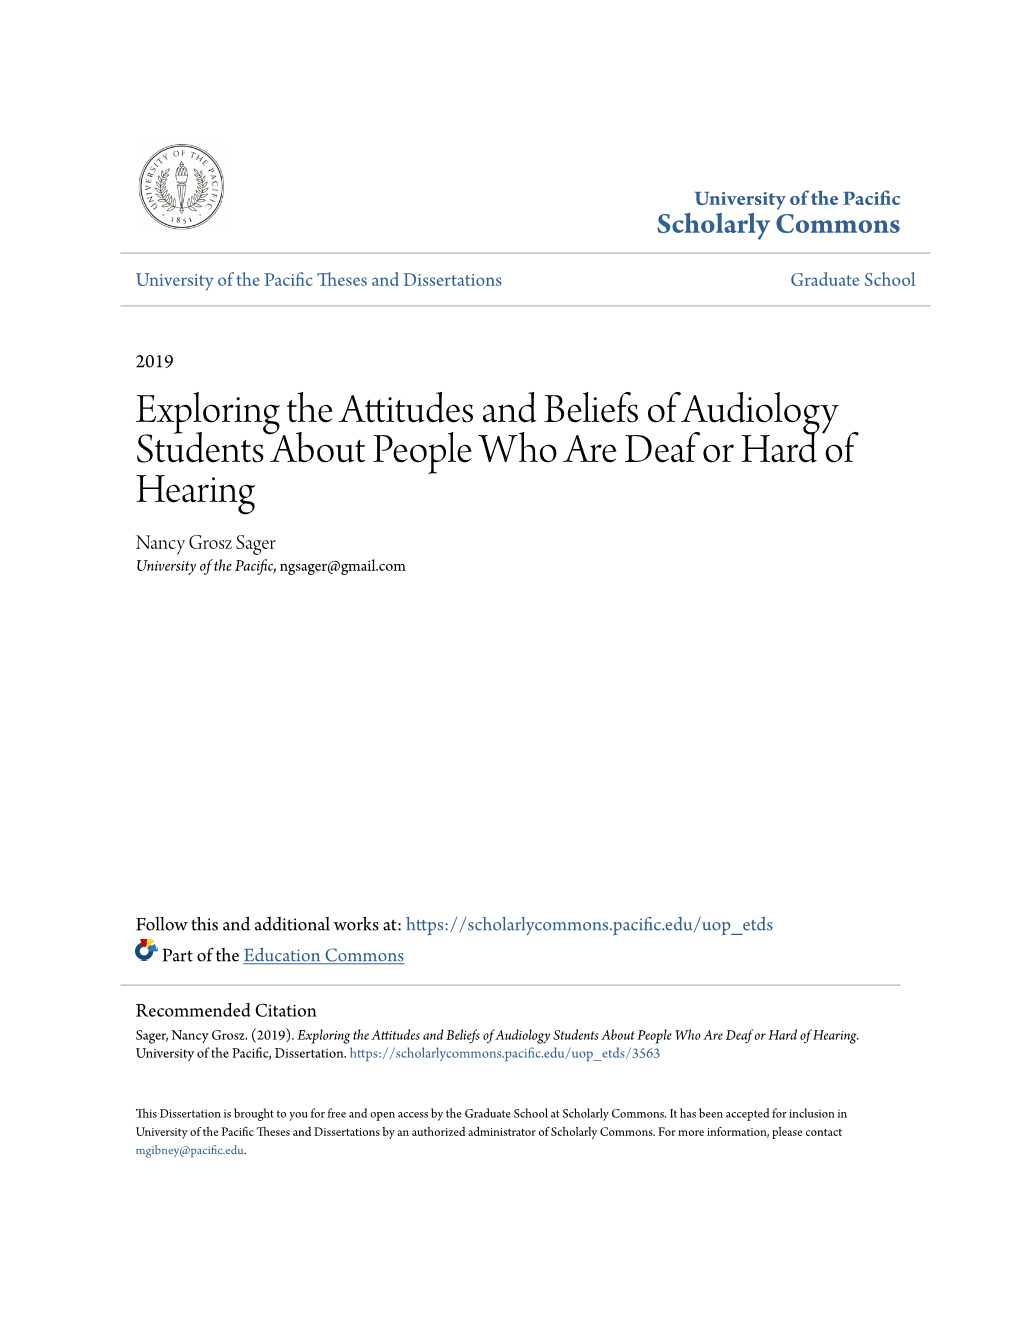 Exploring the Attitudes and Beliefs of Audiology Students About People Who Are Deaf Or Hard of Hearing Nancy Grosz Sager University of the Pacific, Ngsager@Gmail.Com